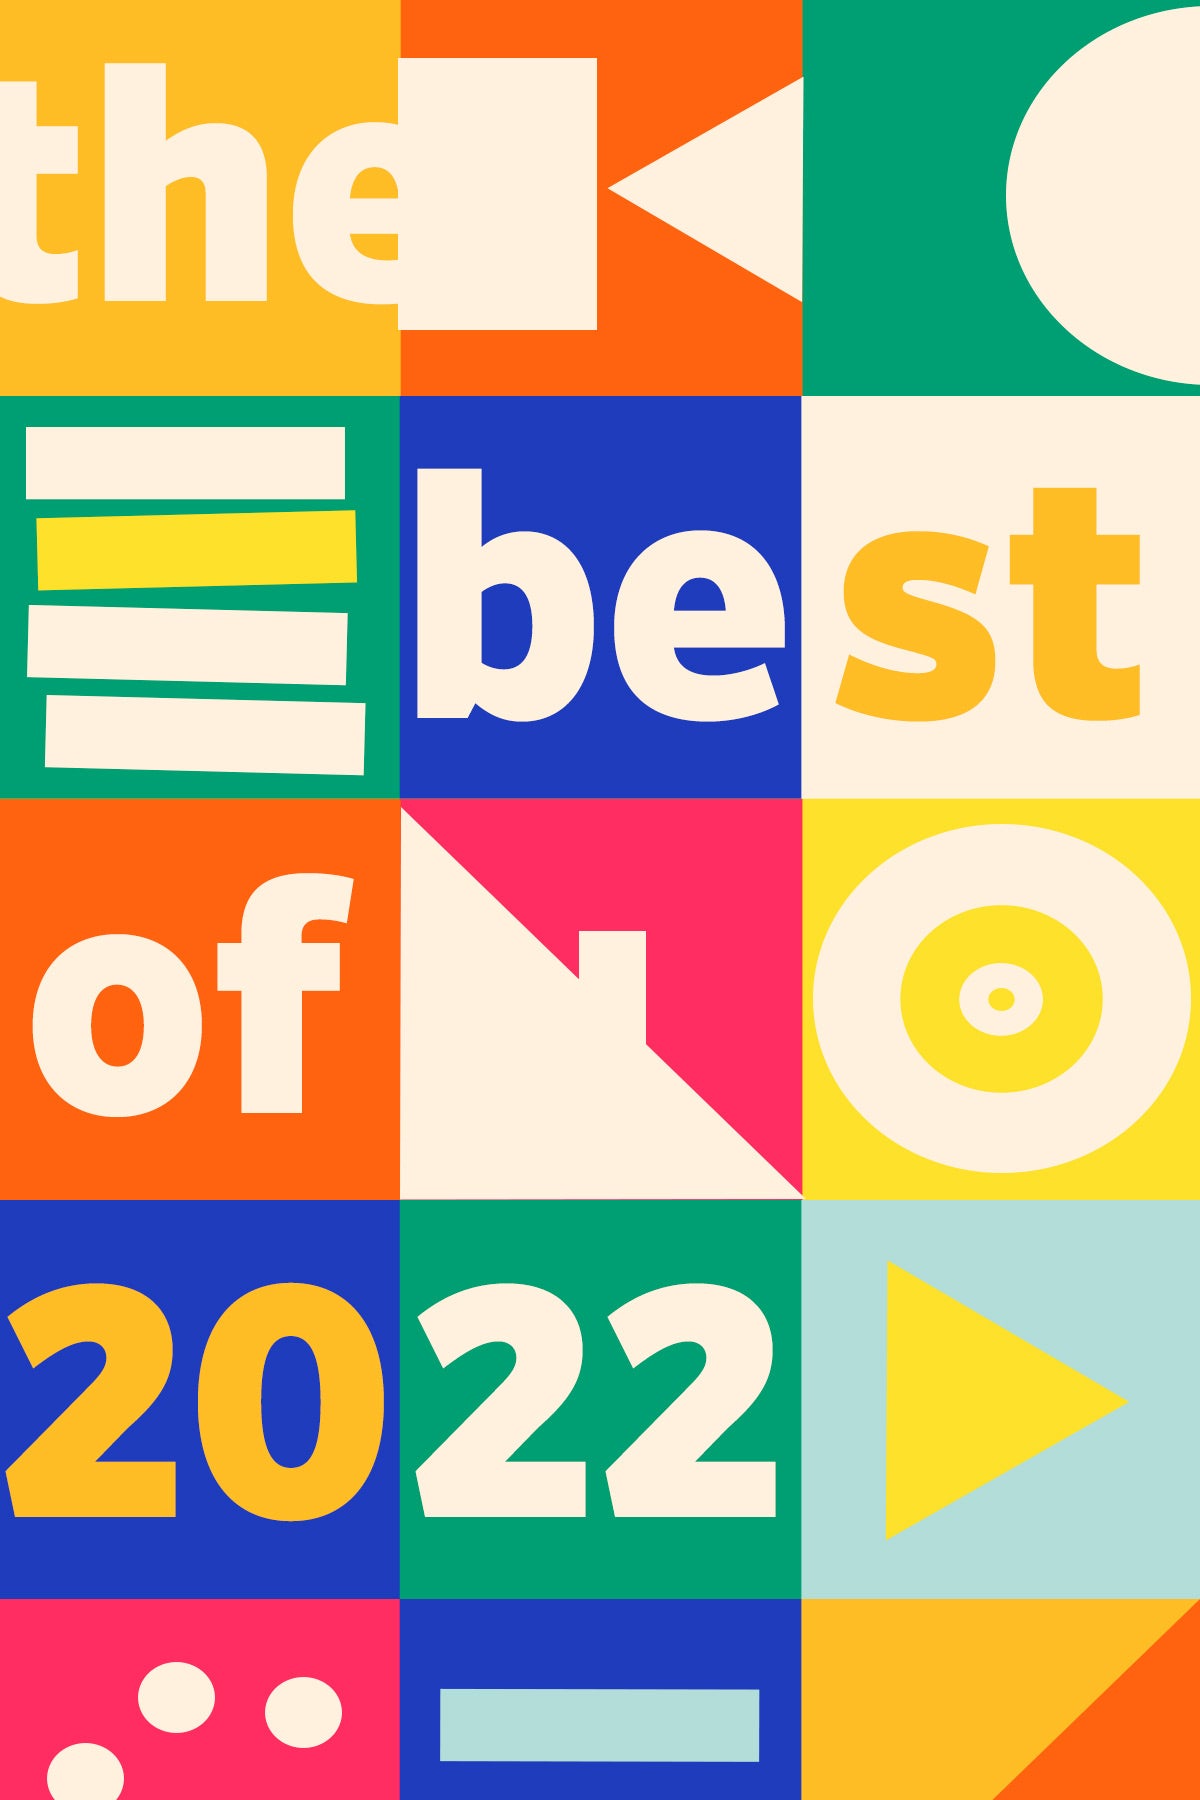 Colorful block text that says "Best of 2022."